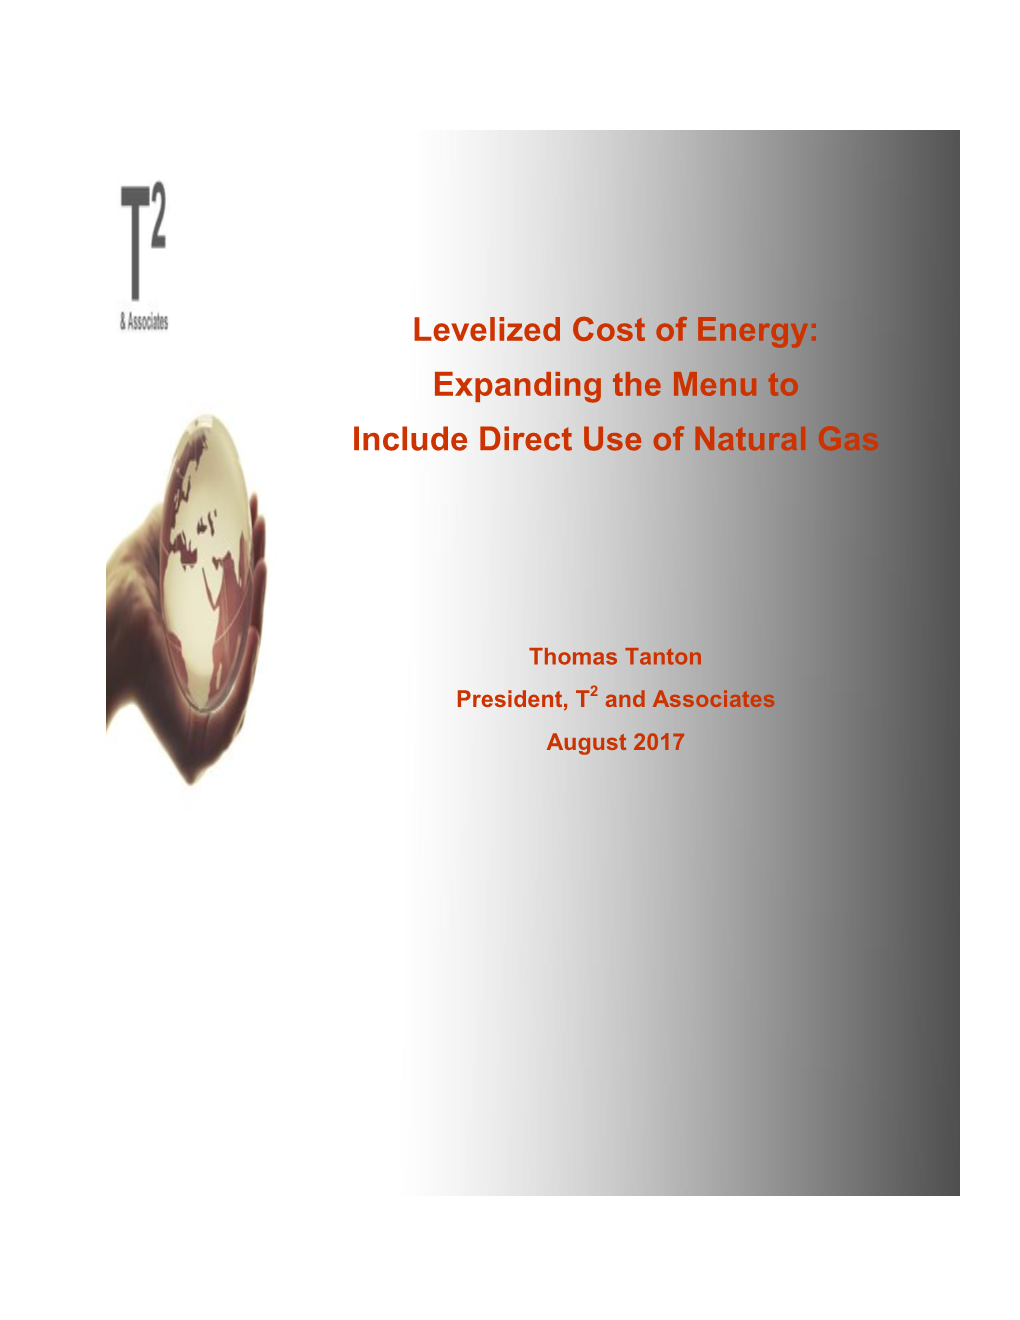 Levelized Cost of Energy: Expanding the Menu to Include Direct Use of Natural Gas